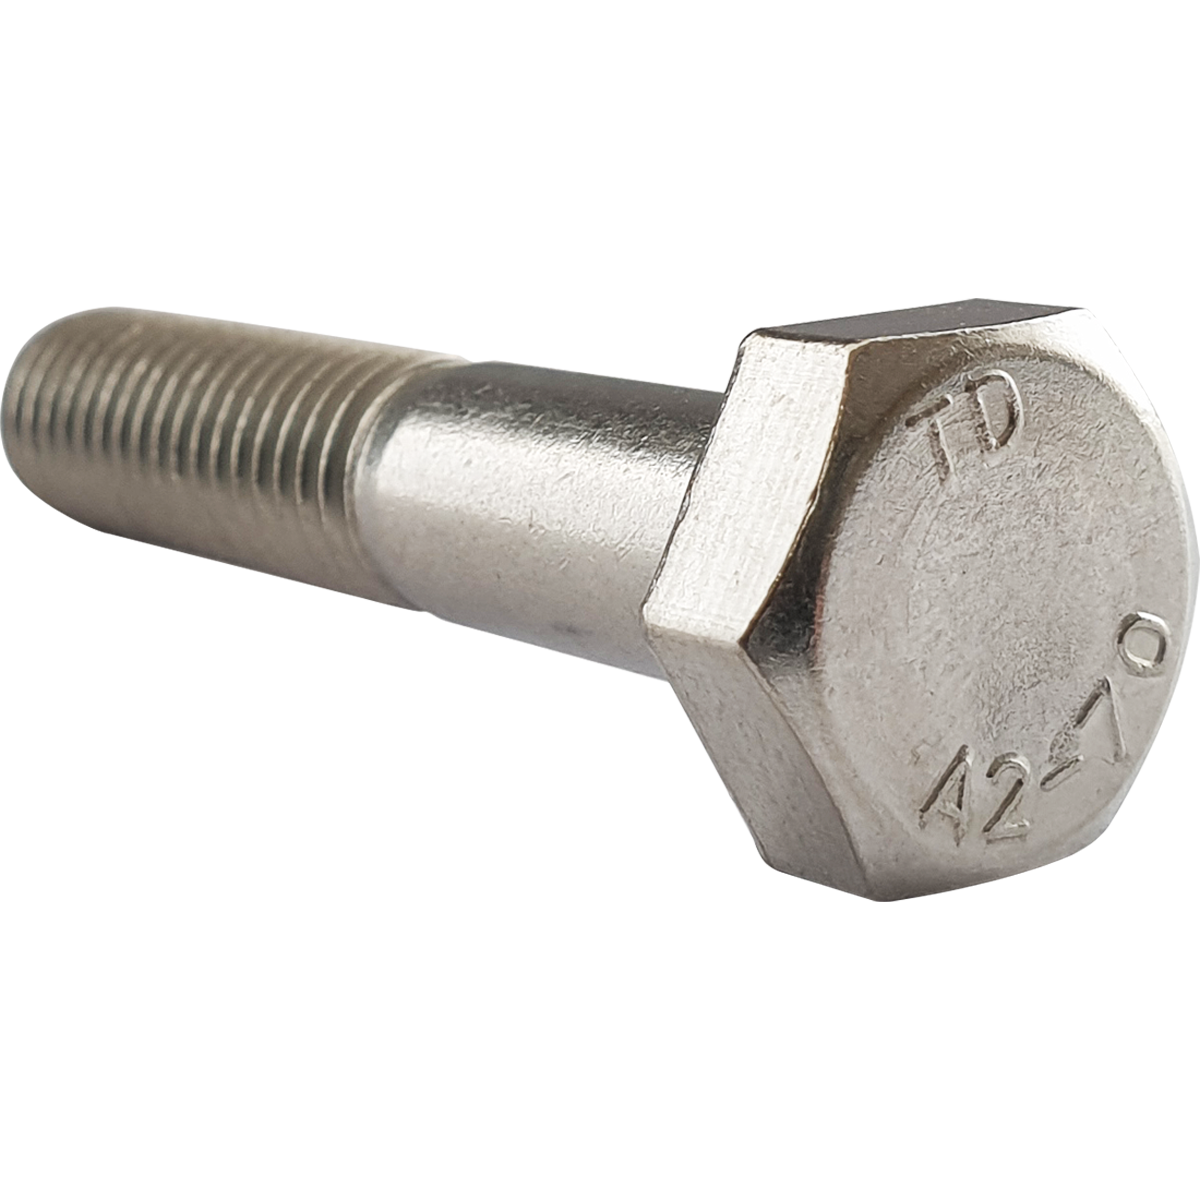 UNF, A2 stainless steel, part thread hex bolts. Also known as hex head bolts and available at very competitive prices